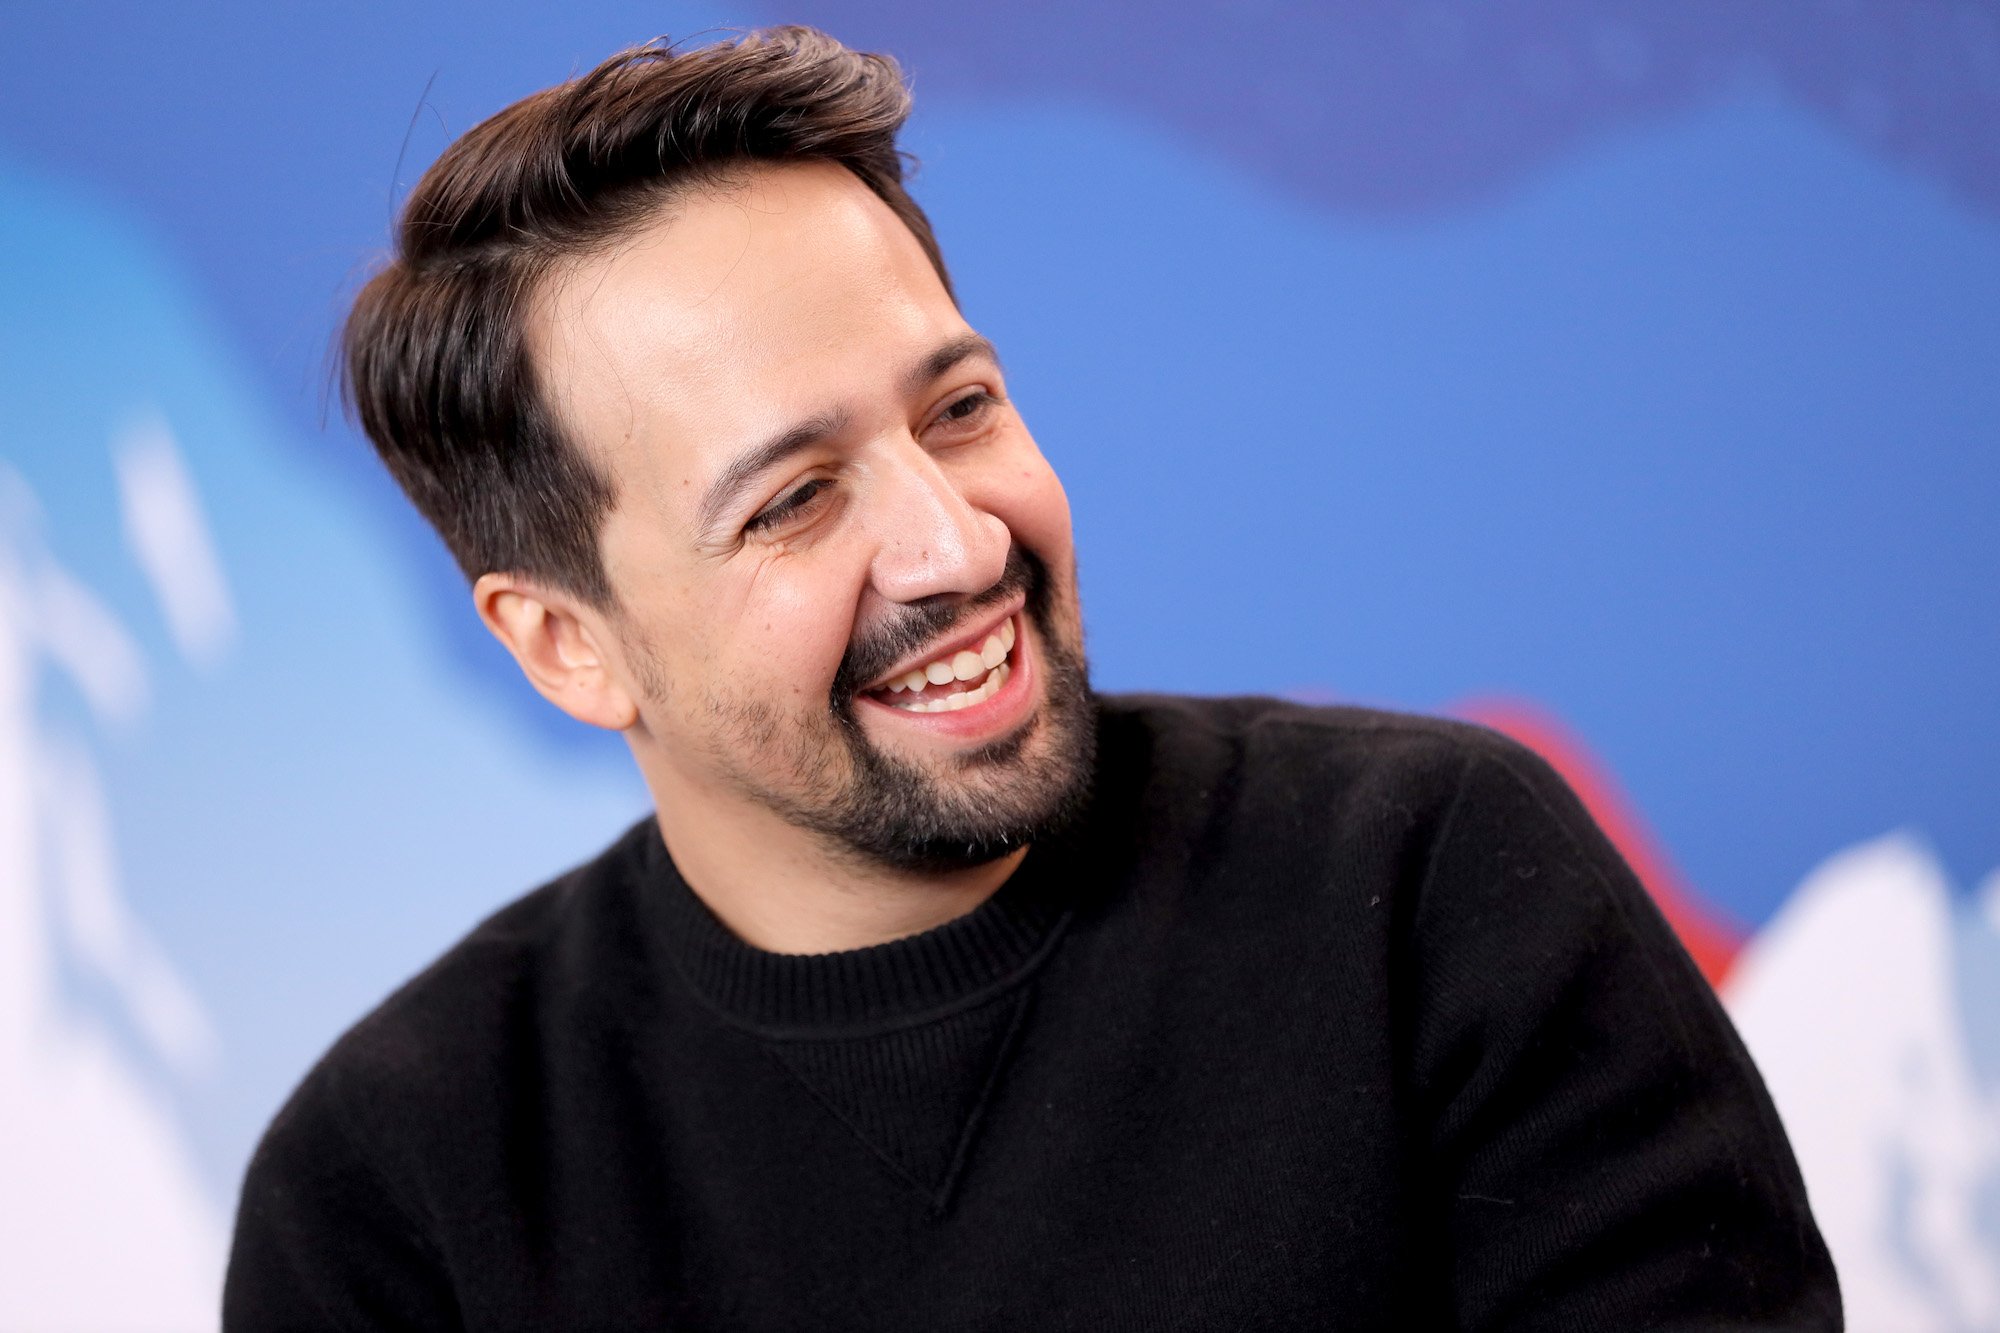 Lin-Manuel Miranda turned to the side, laughing